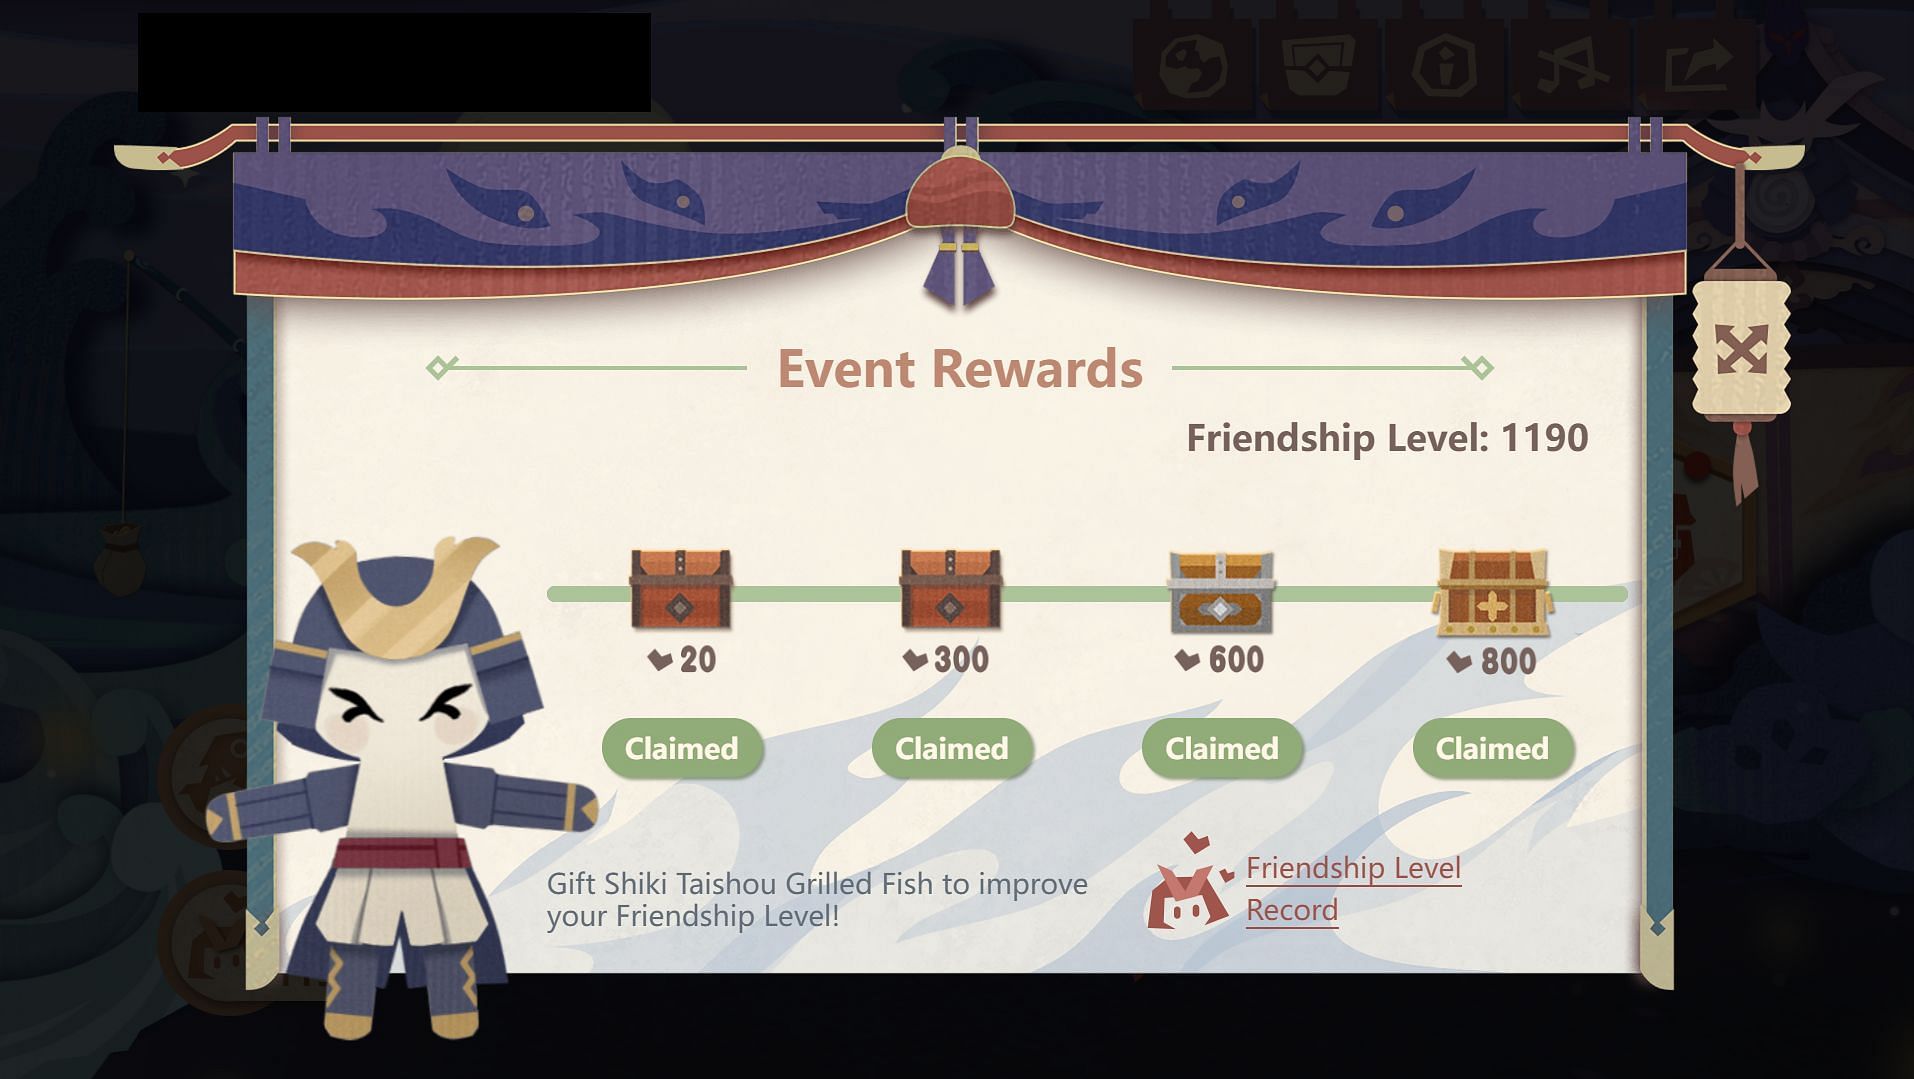 Claim the rewards from the Event Rewards page (Image via Genshin Impact)